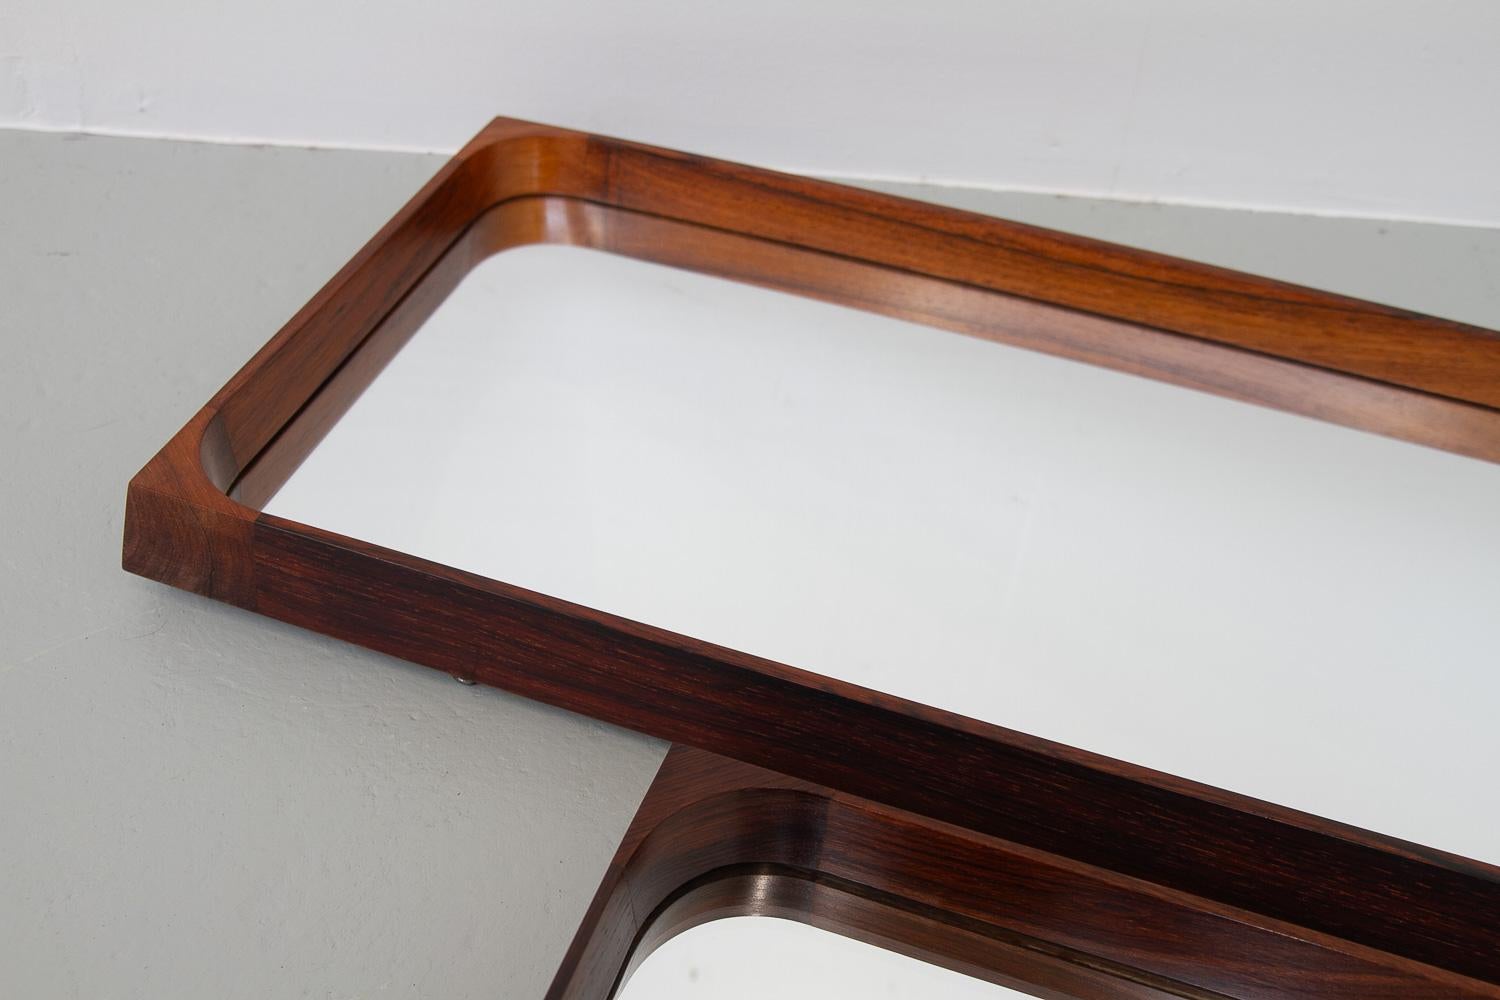 Danish Modern Rosewood Mirrors by Niels Clausen for NC Møbler, 1960s. Set of 2. For Sale 6